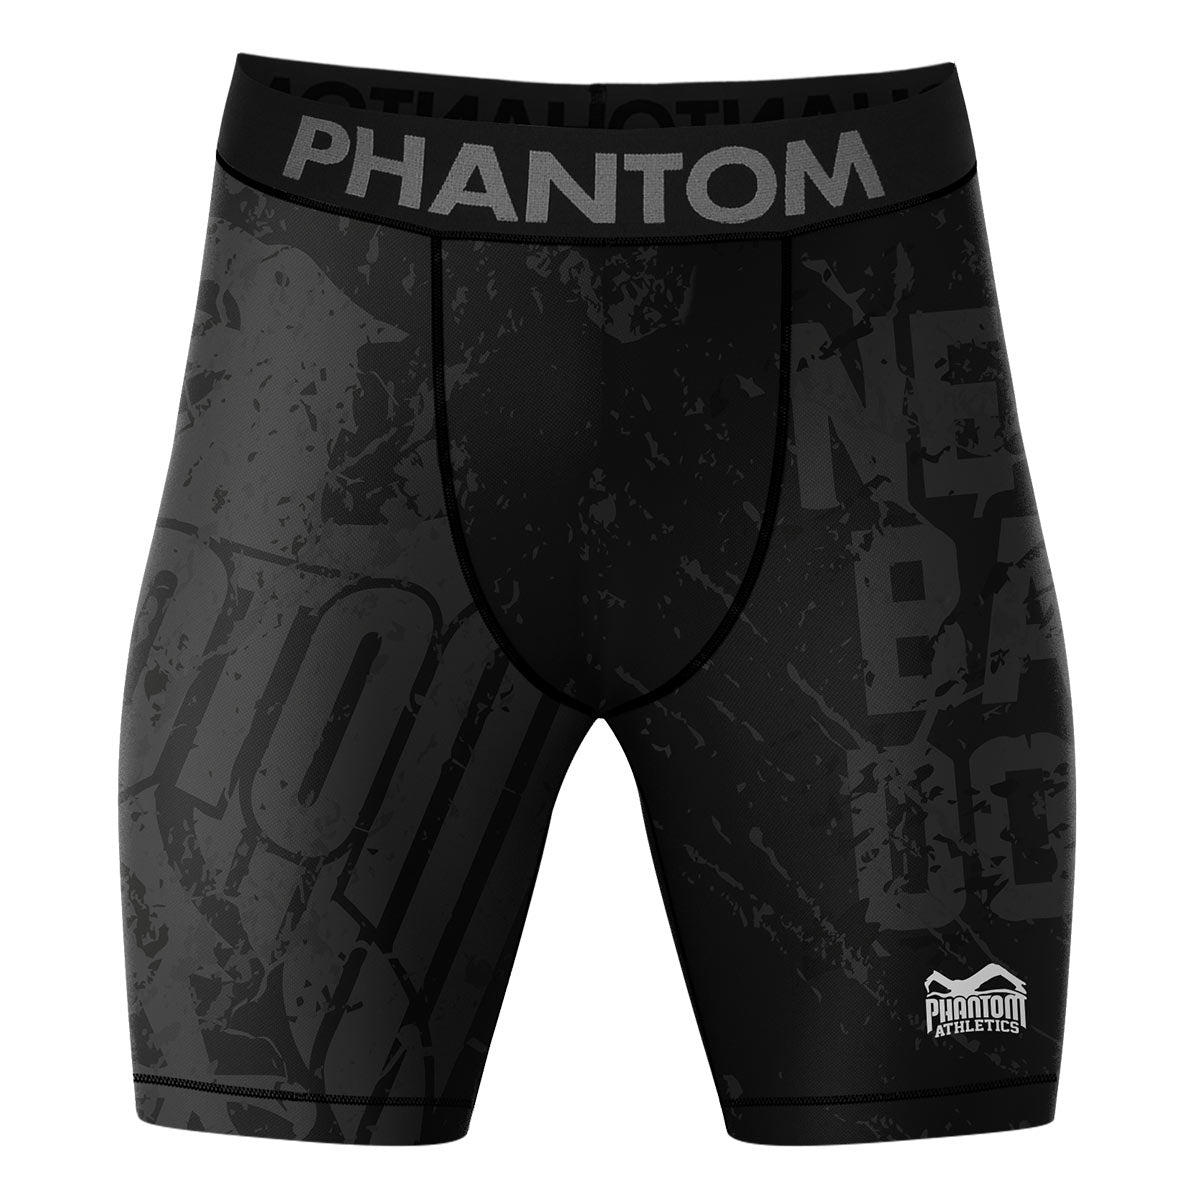 The Phantom EVO compression fight shorts in Team Germany design. With Germany eagle and "Never Back Down" lettering. Ideal for your combat sports, such as MMA, Muay Thai, wrestling, BJJ or kickboxing.